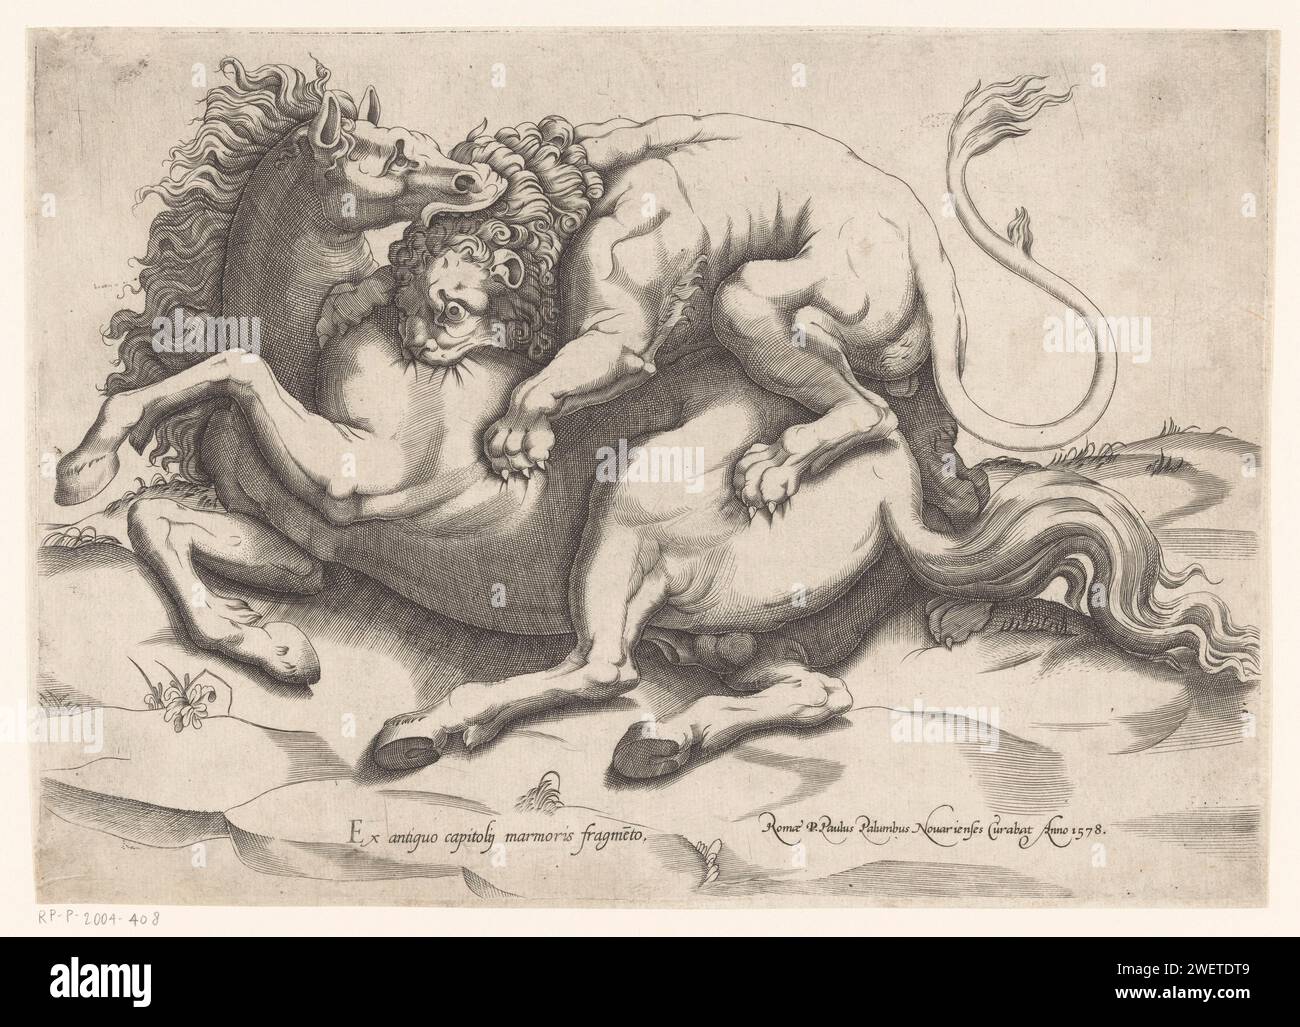 Horse attacked by a lion, 1578 print A lion and a horse in fight. The lion climbed the horse in an attack. He bitten himself in the skin of the horse, while the horse in turn biting the Lion's head.  paper engraving beasts of prey, predatory animals: lion. horse. animals (+ fighting animals; aggressive relations) Stock Photo